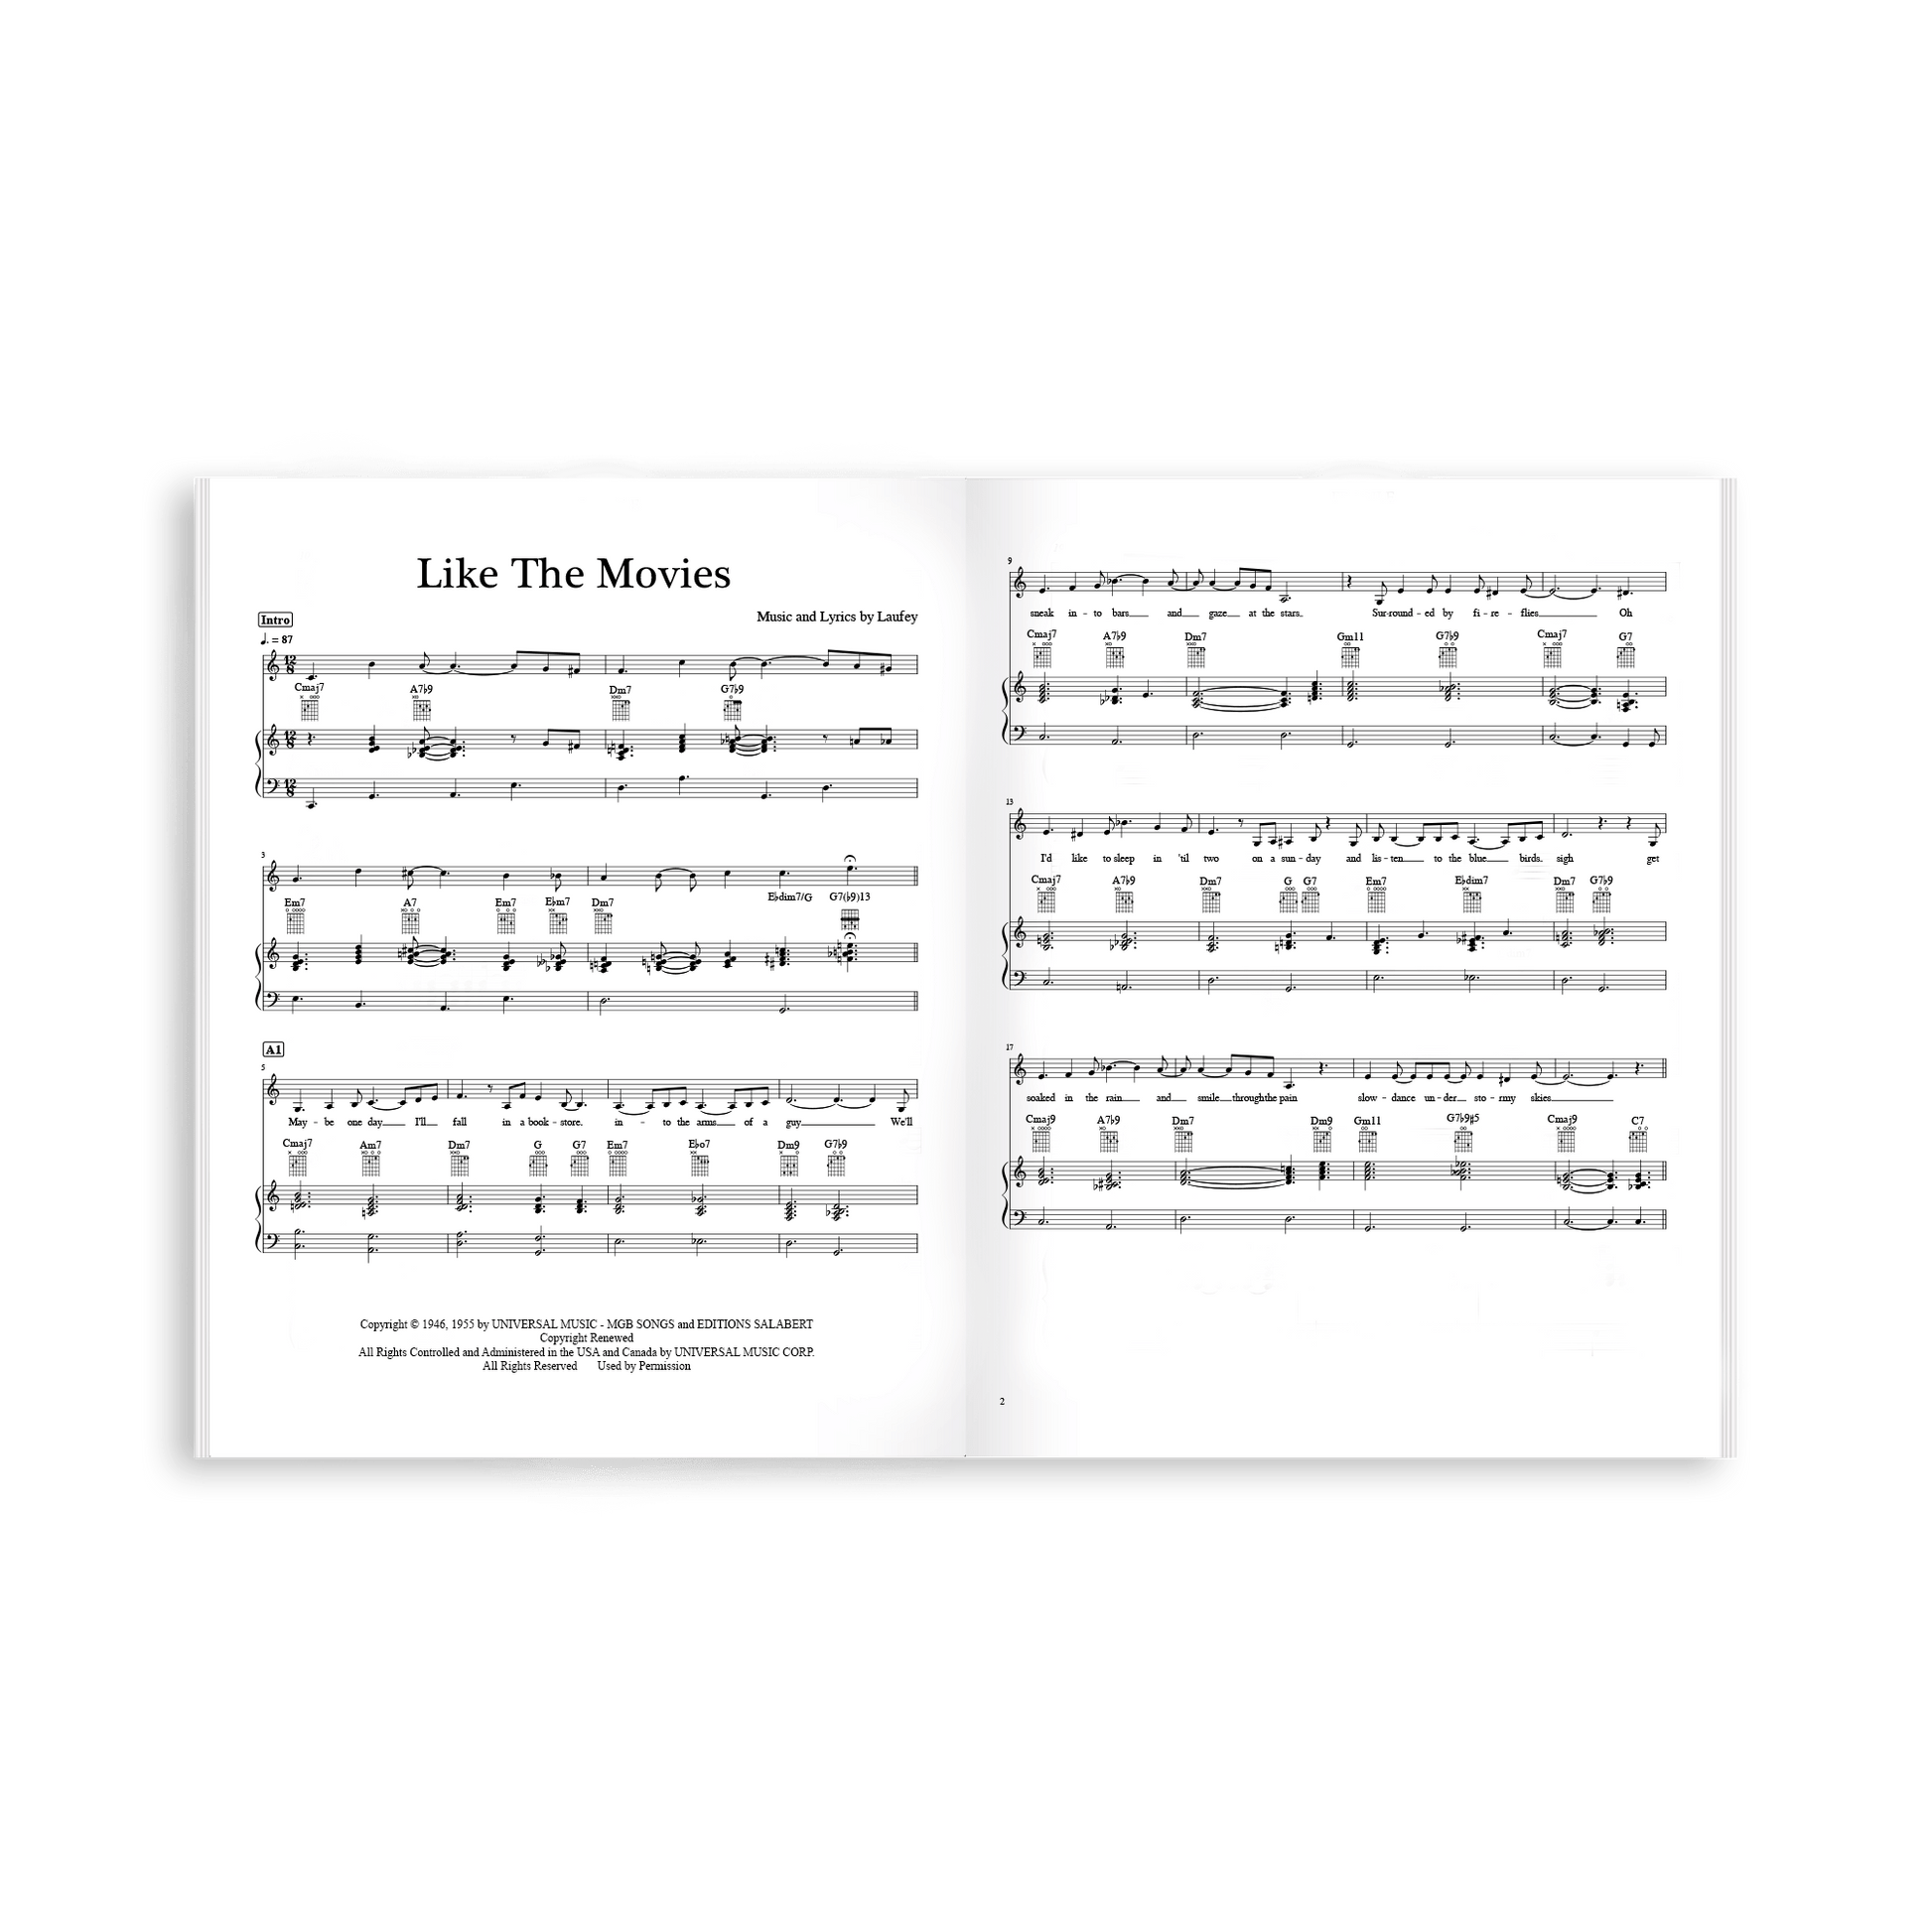 Typical of Me - Sheet Music - Laufey Merch